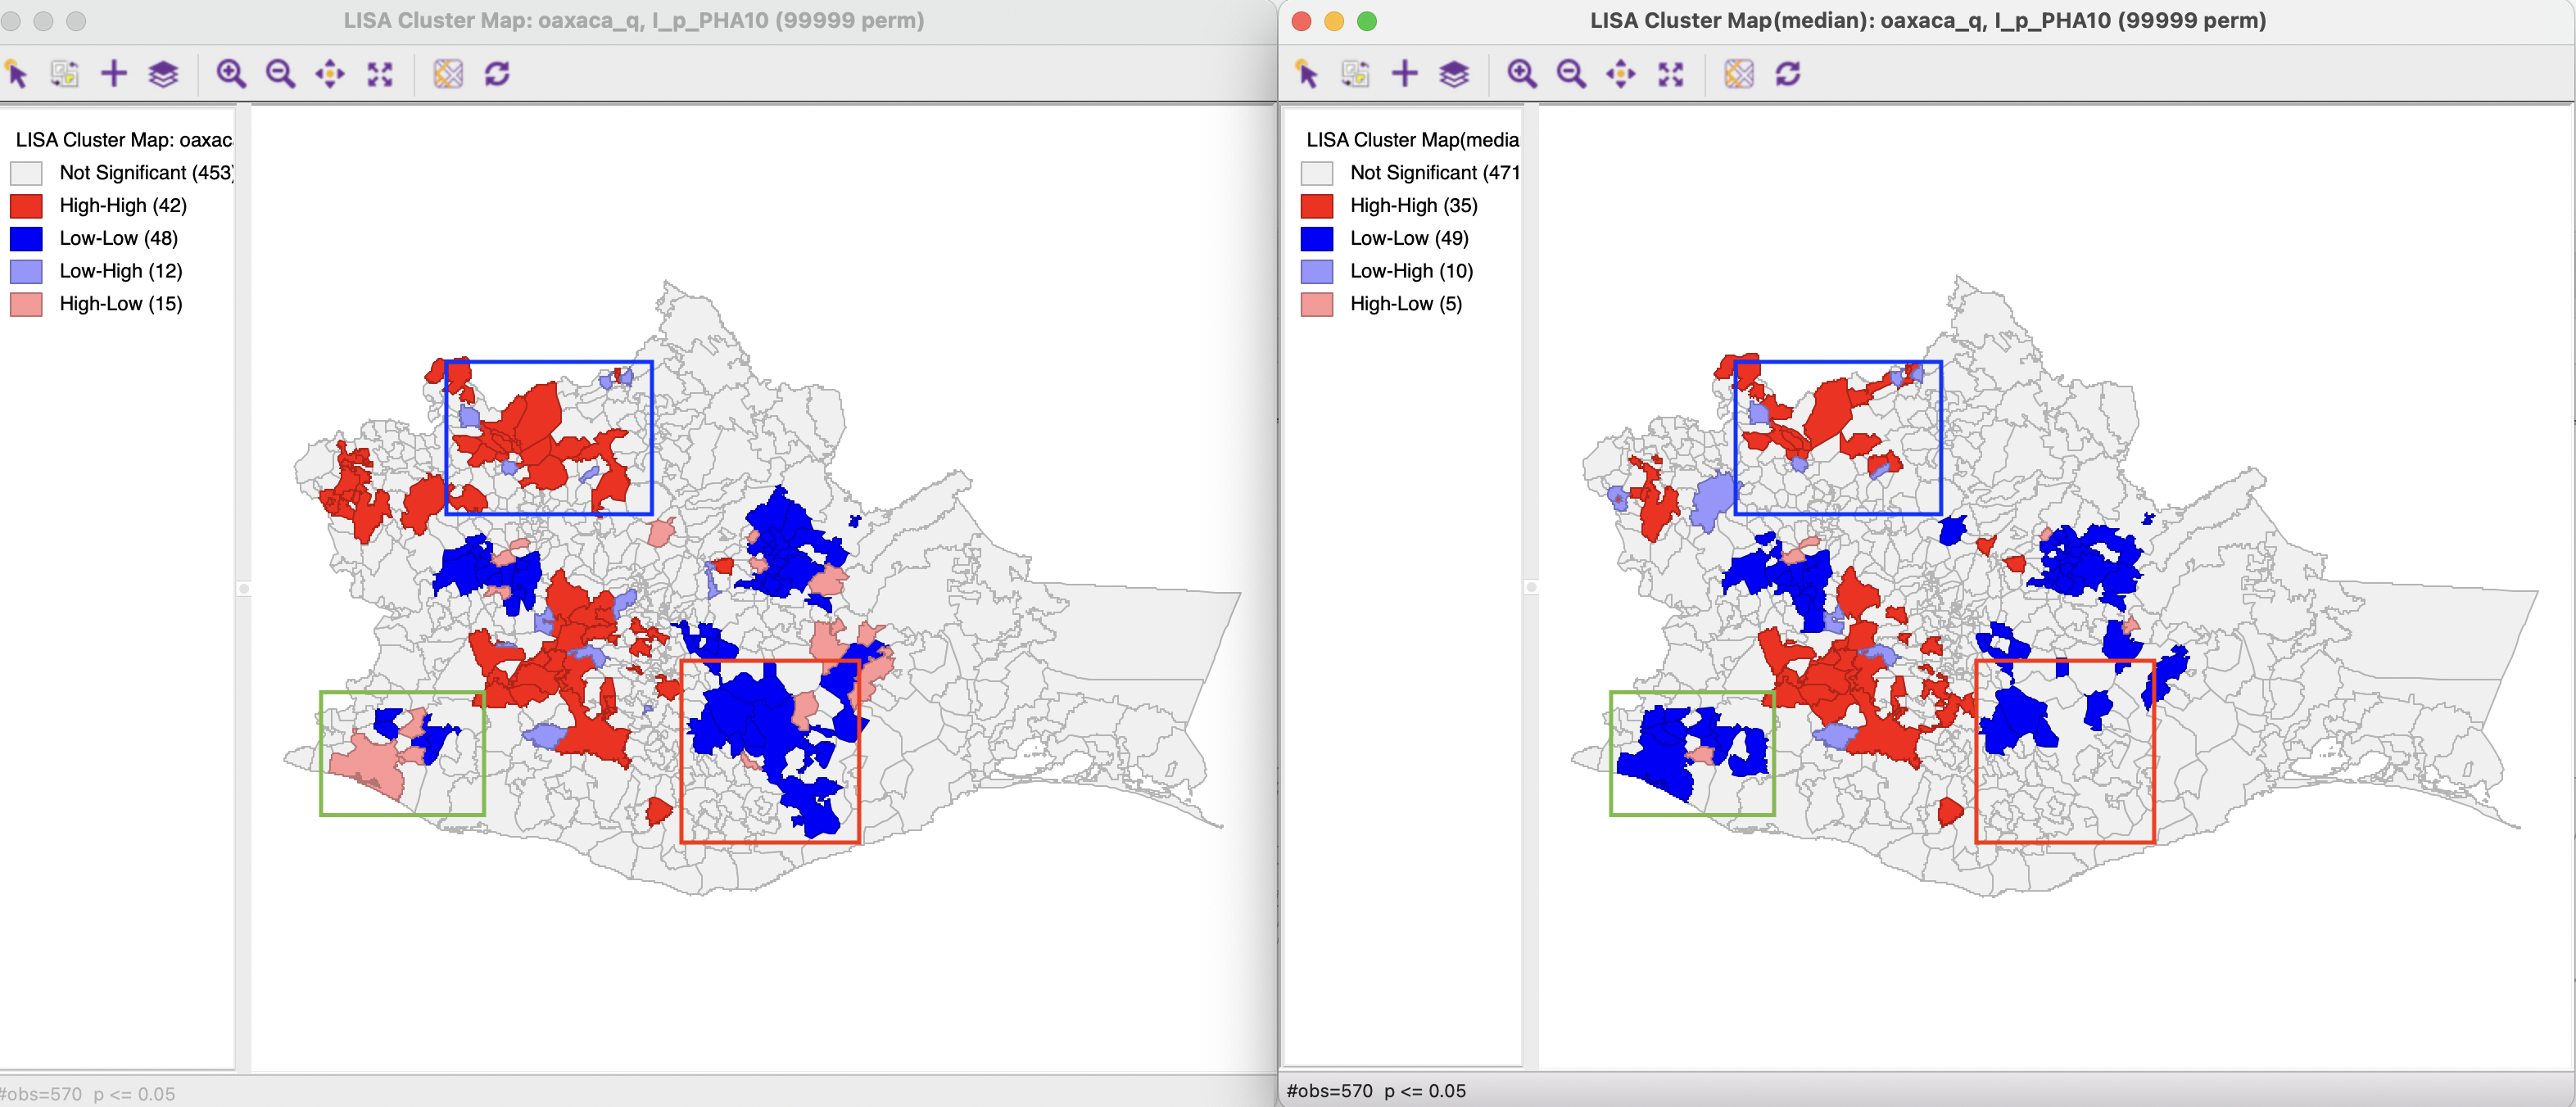 Cluster maps conventional and Median Local Moran